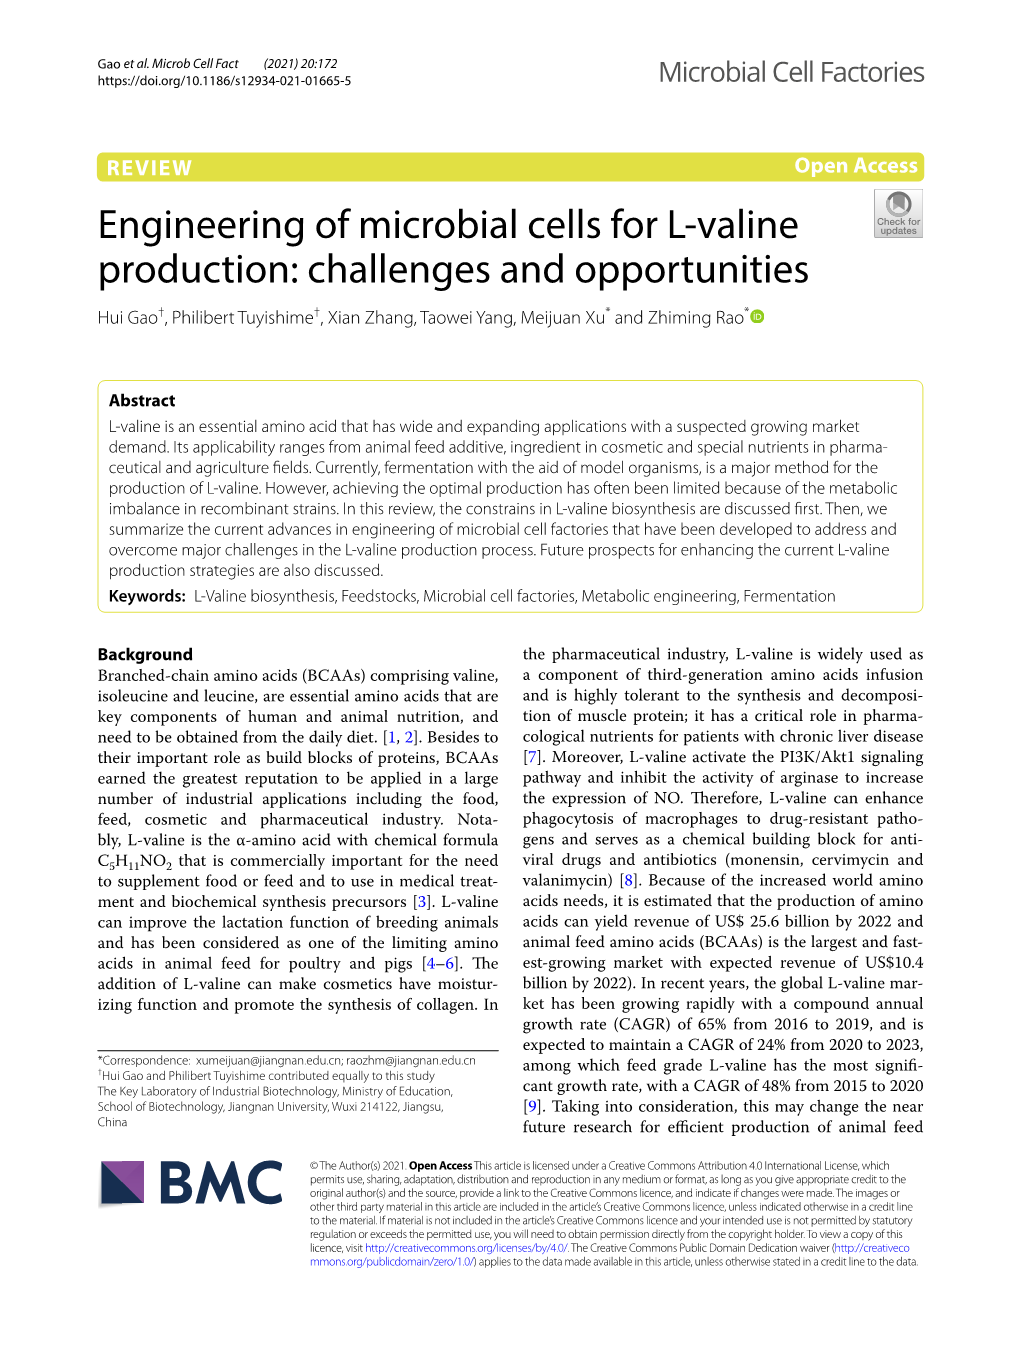 Engineering of Microbial Cells for L-Valine Production